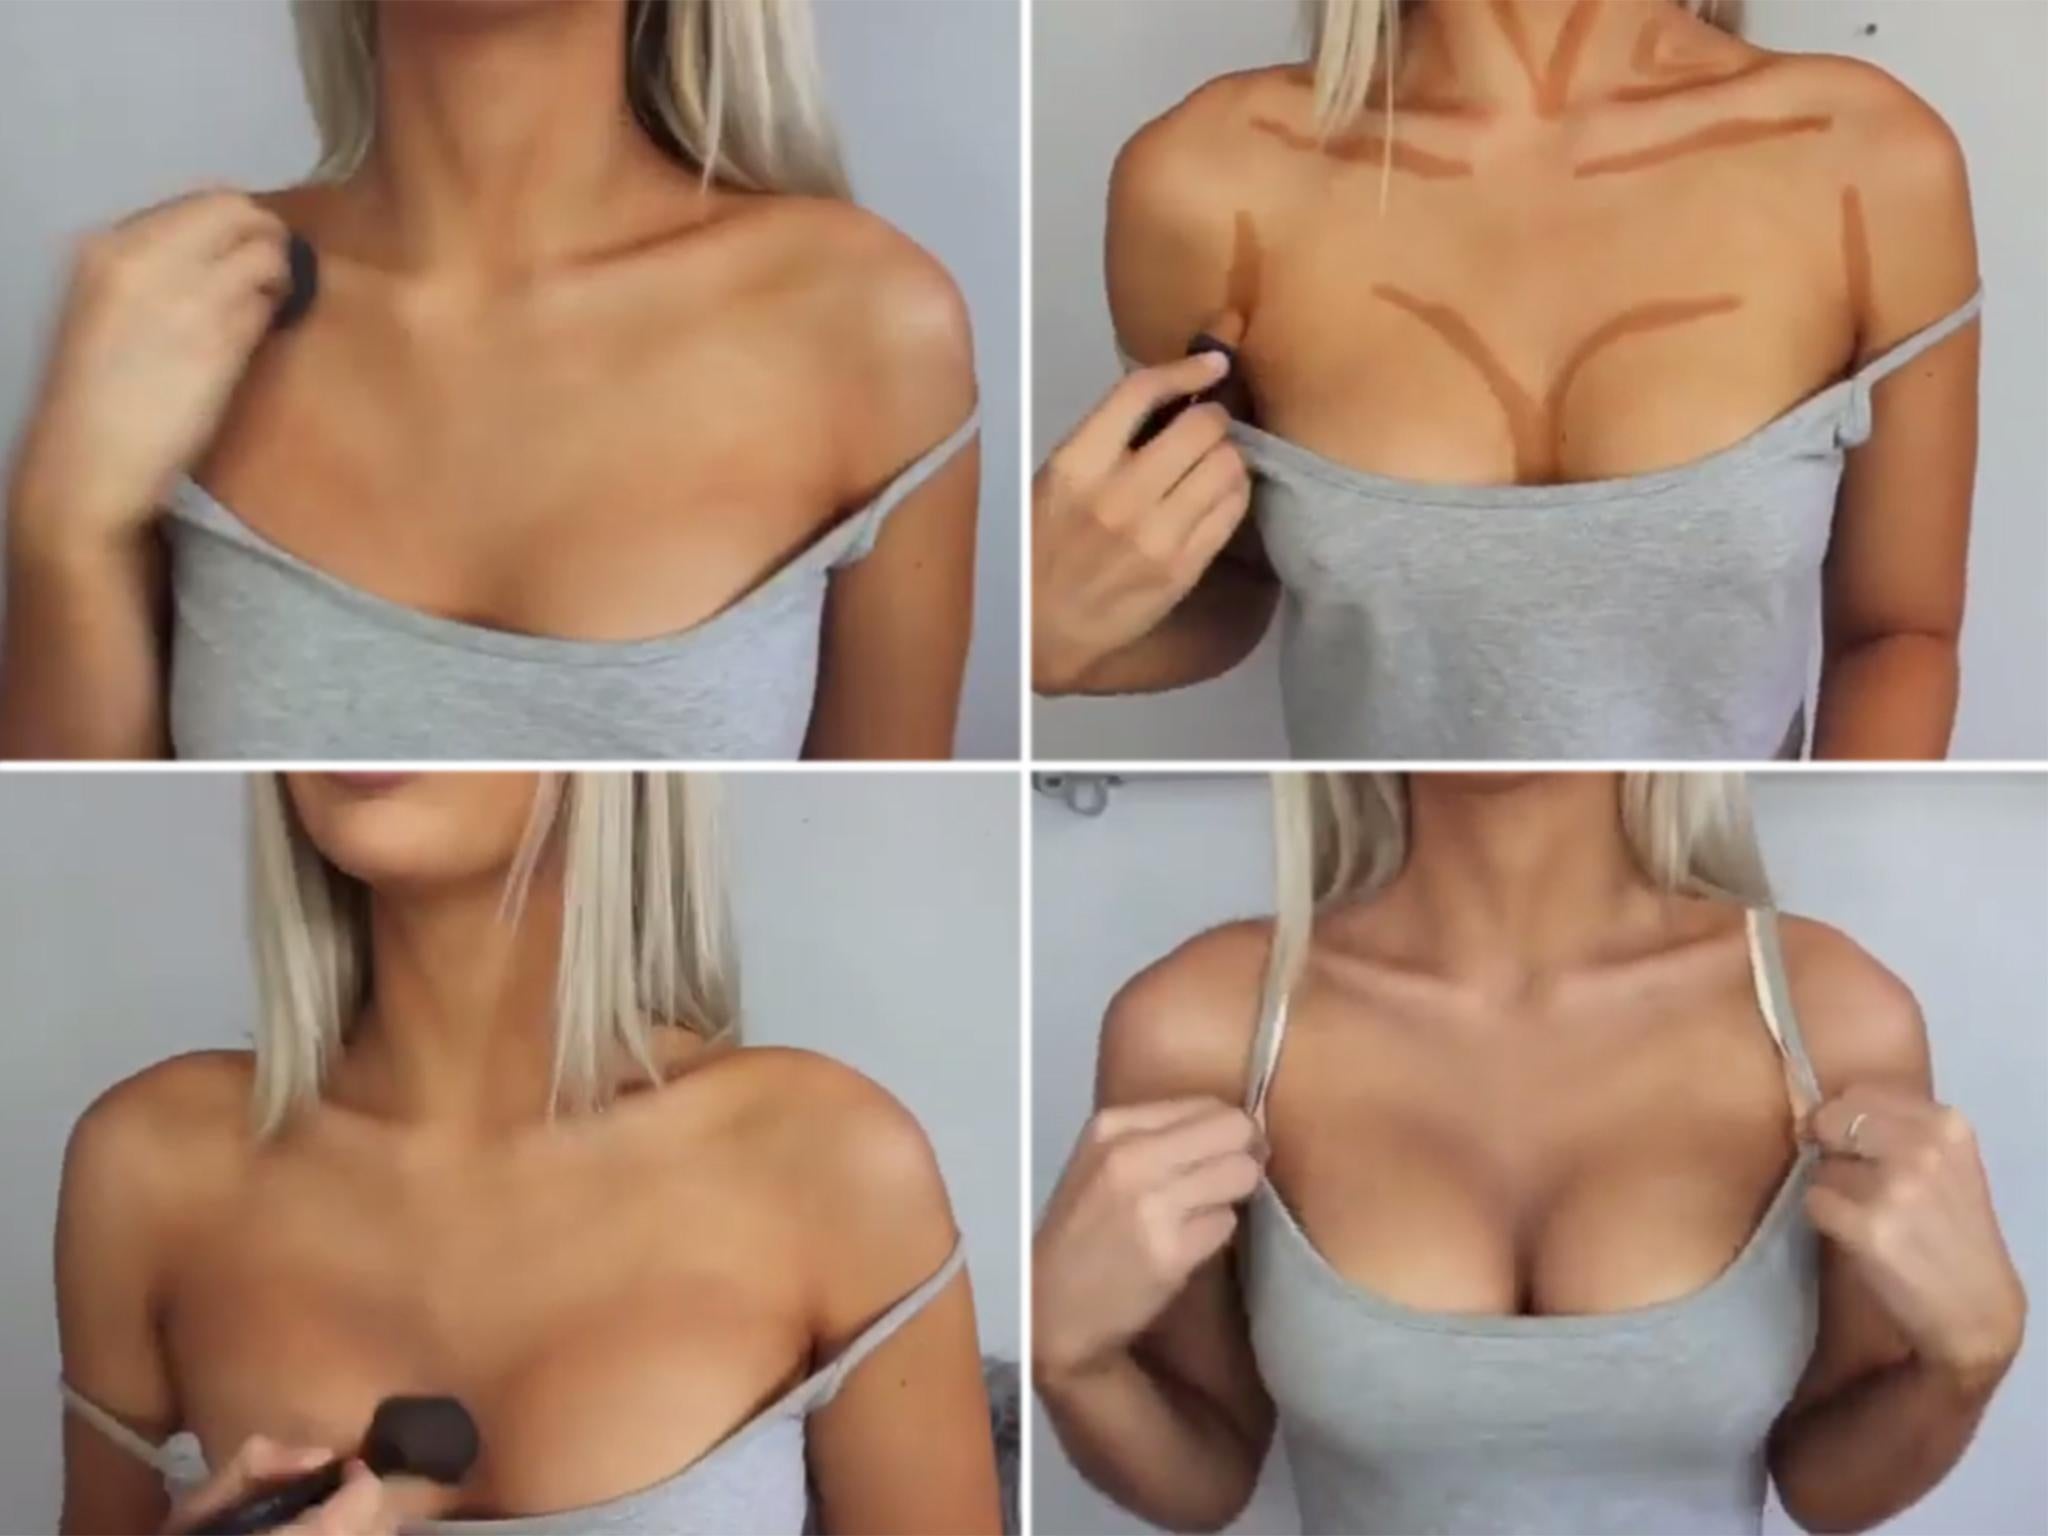 make-up tutorial shows women how to increase their breast size by  three entire cups, The Independent